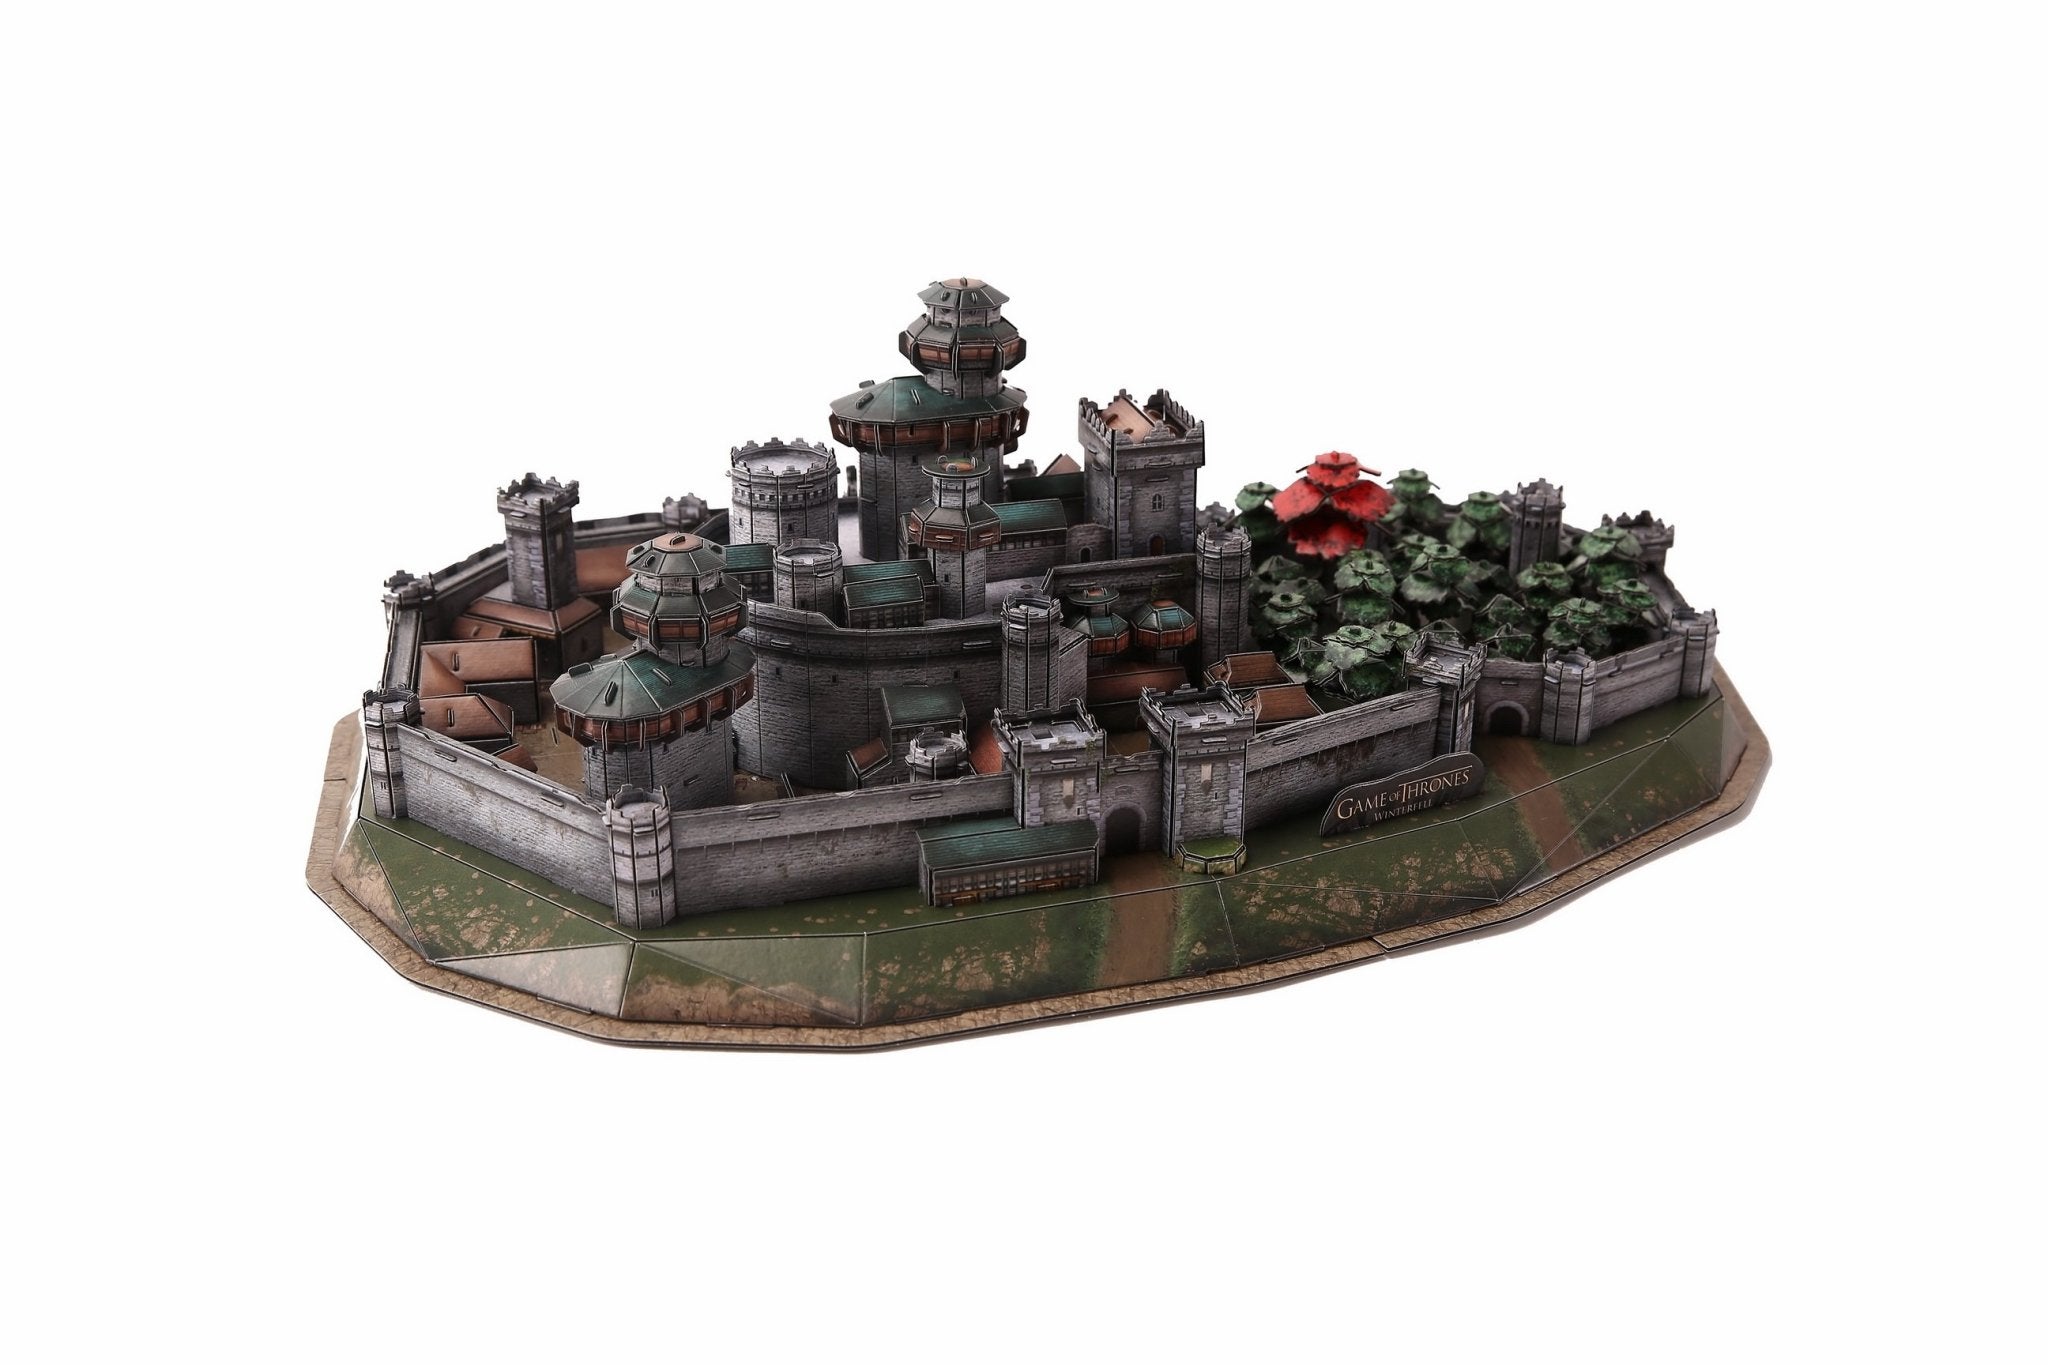 3D Puzzle Game of Thrones Winterfell Puzzle - 4D Puzzle - 4D Cityscape
